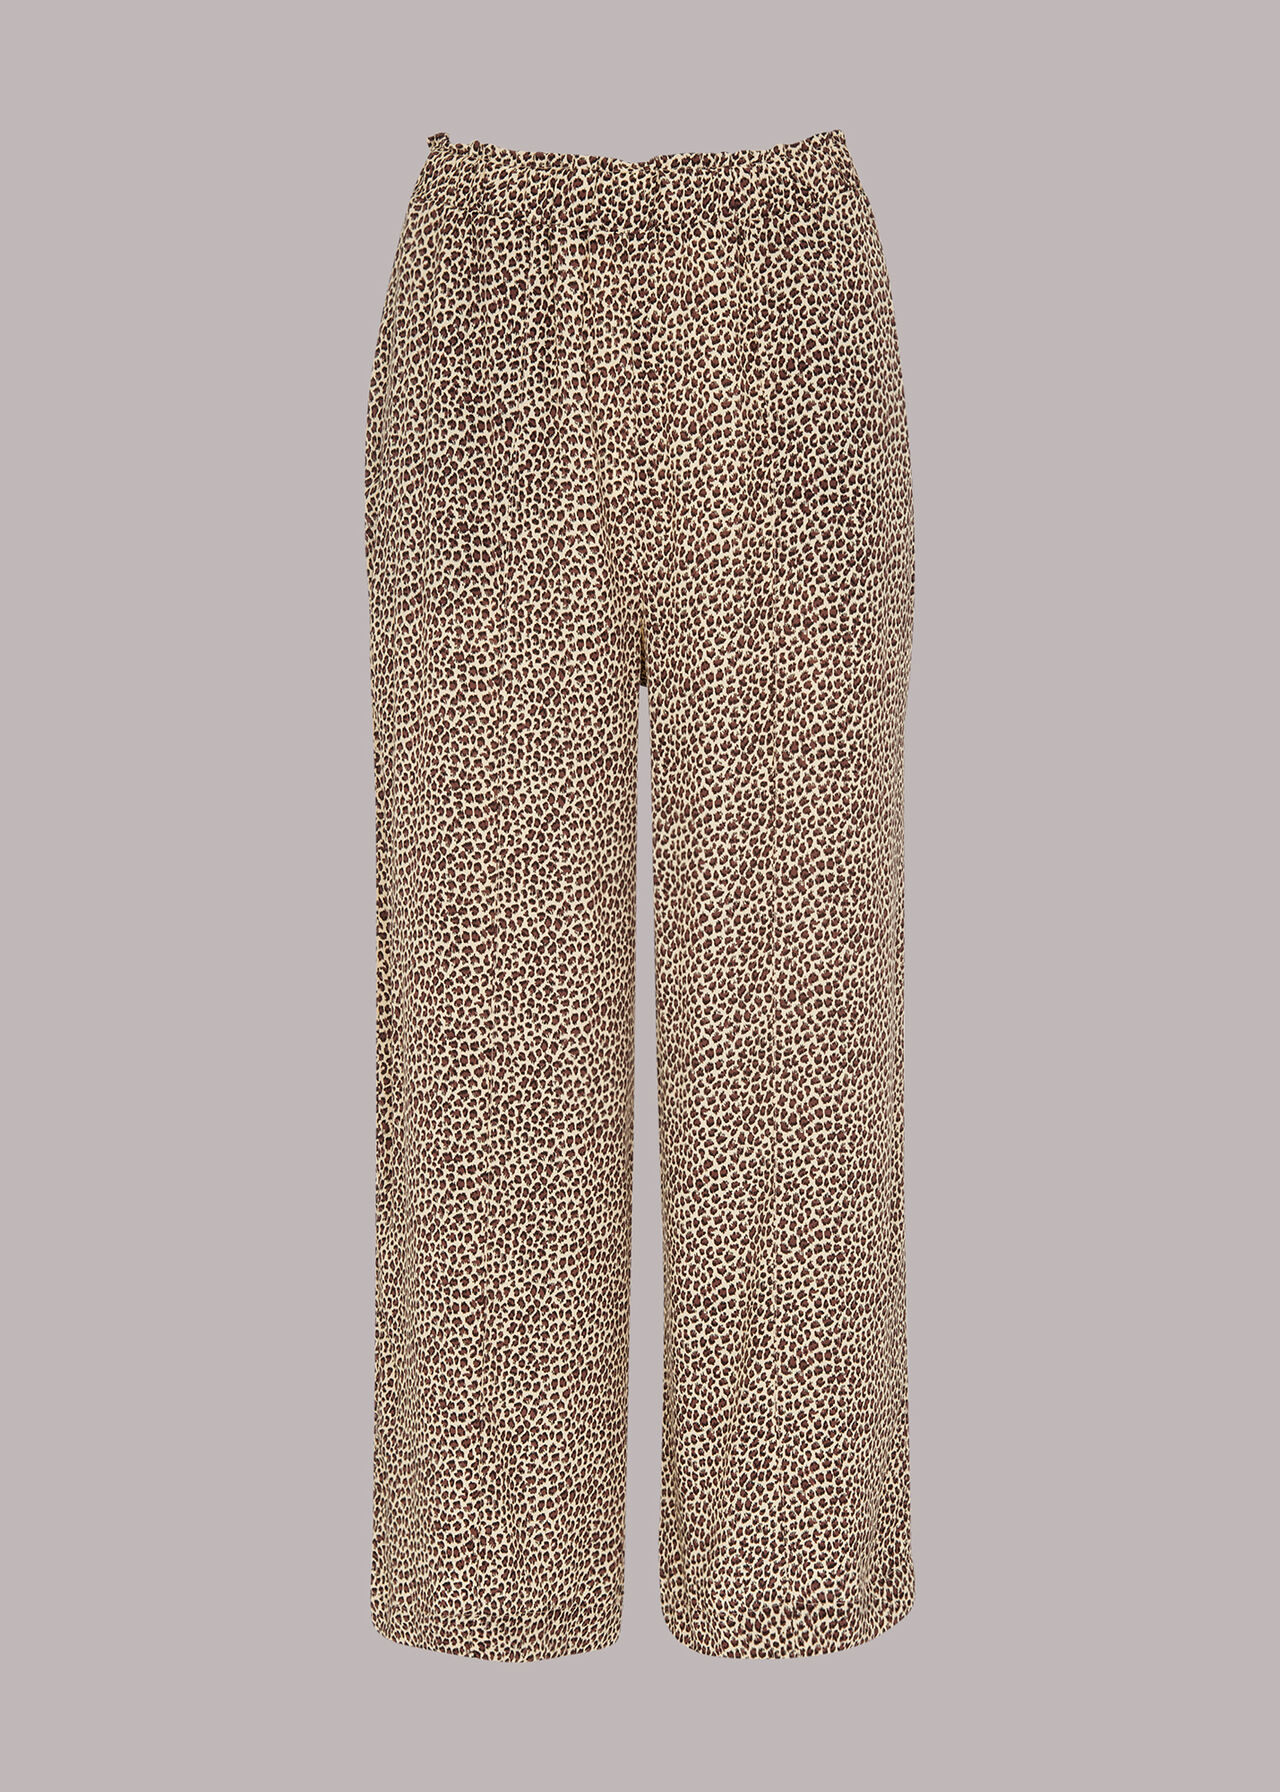 Dashed Leopard Print Trouser